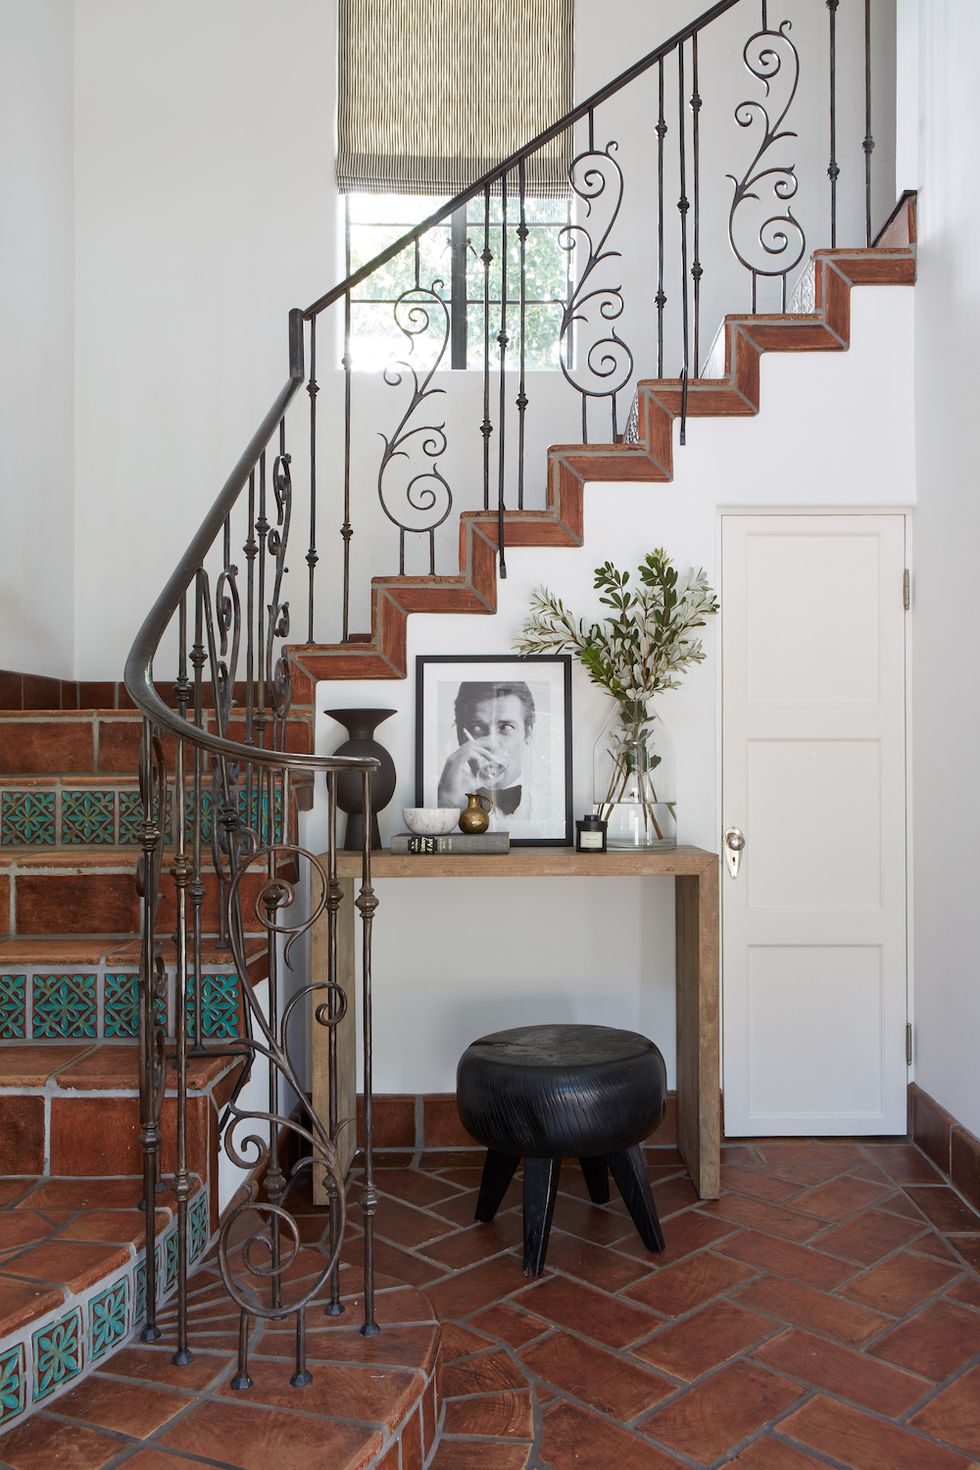 8 Clever Ways to Utilize That Awkward Space Under Your Stairs